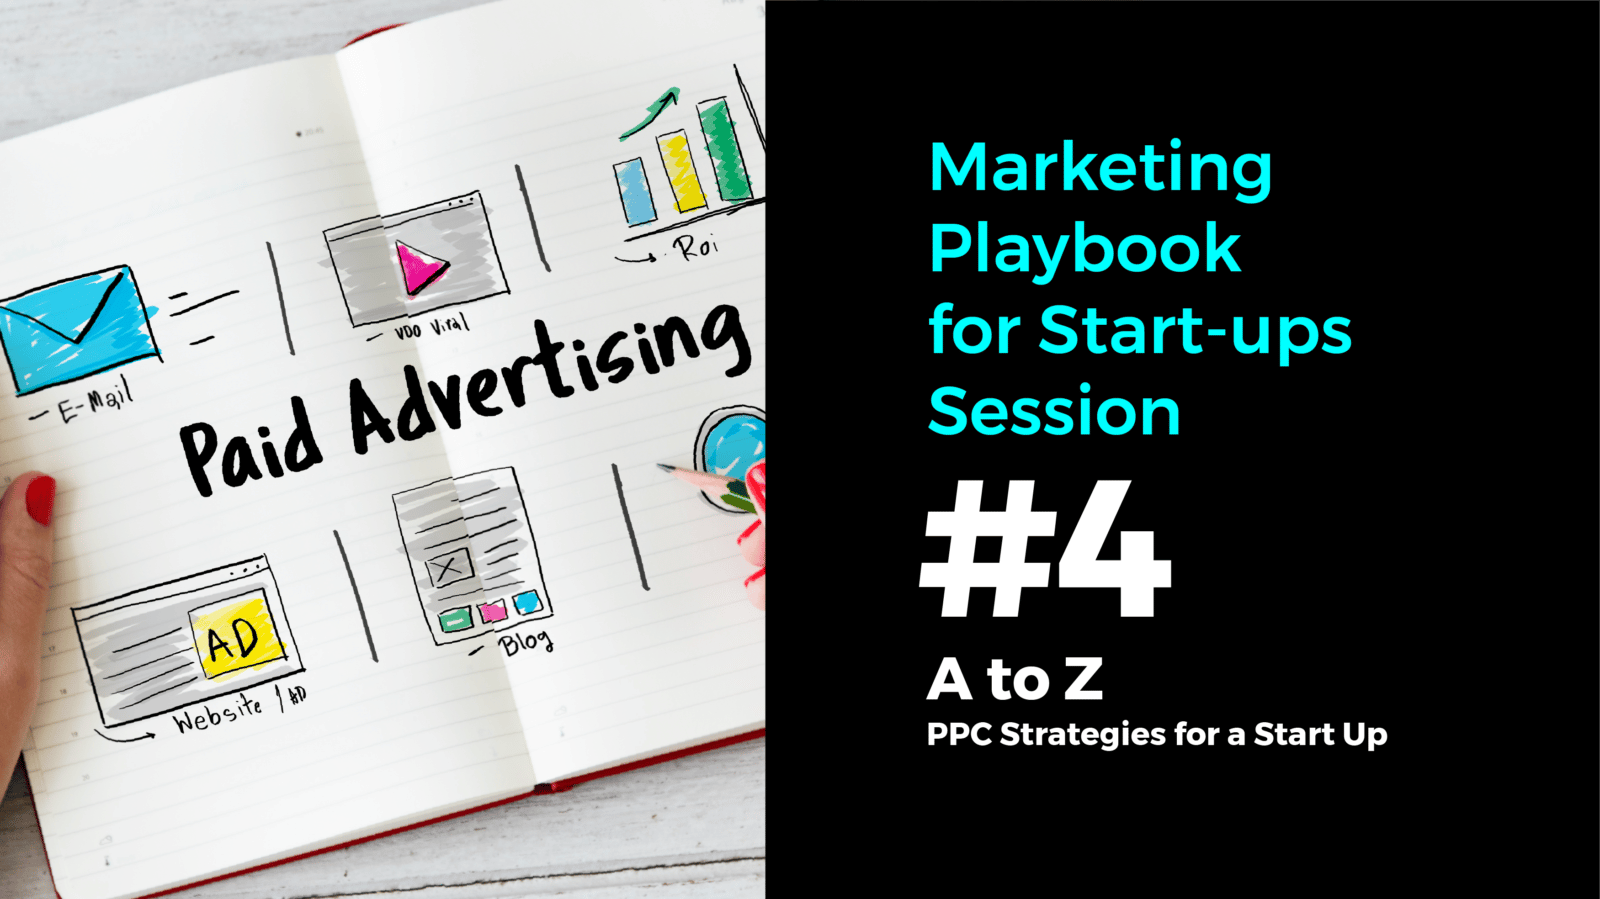 Marketing Playbook for Start-ups Session #4 – A to Z PPC Strategies for a Start-Up